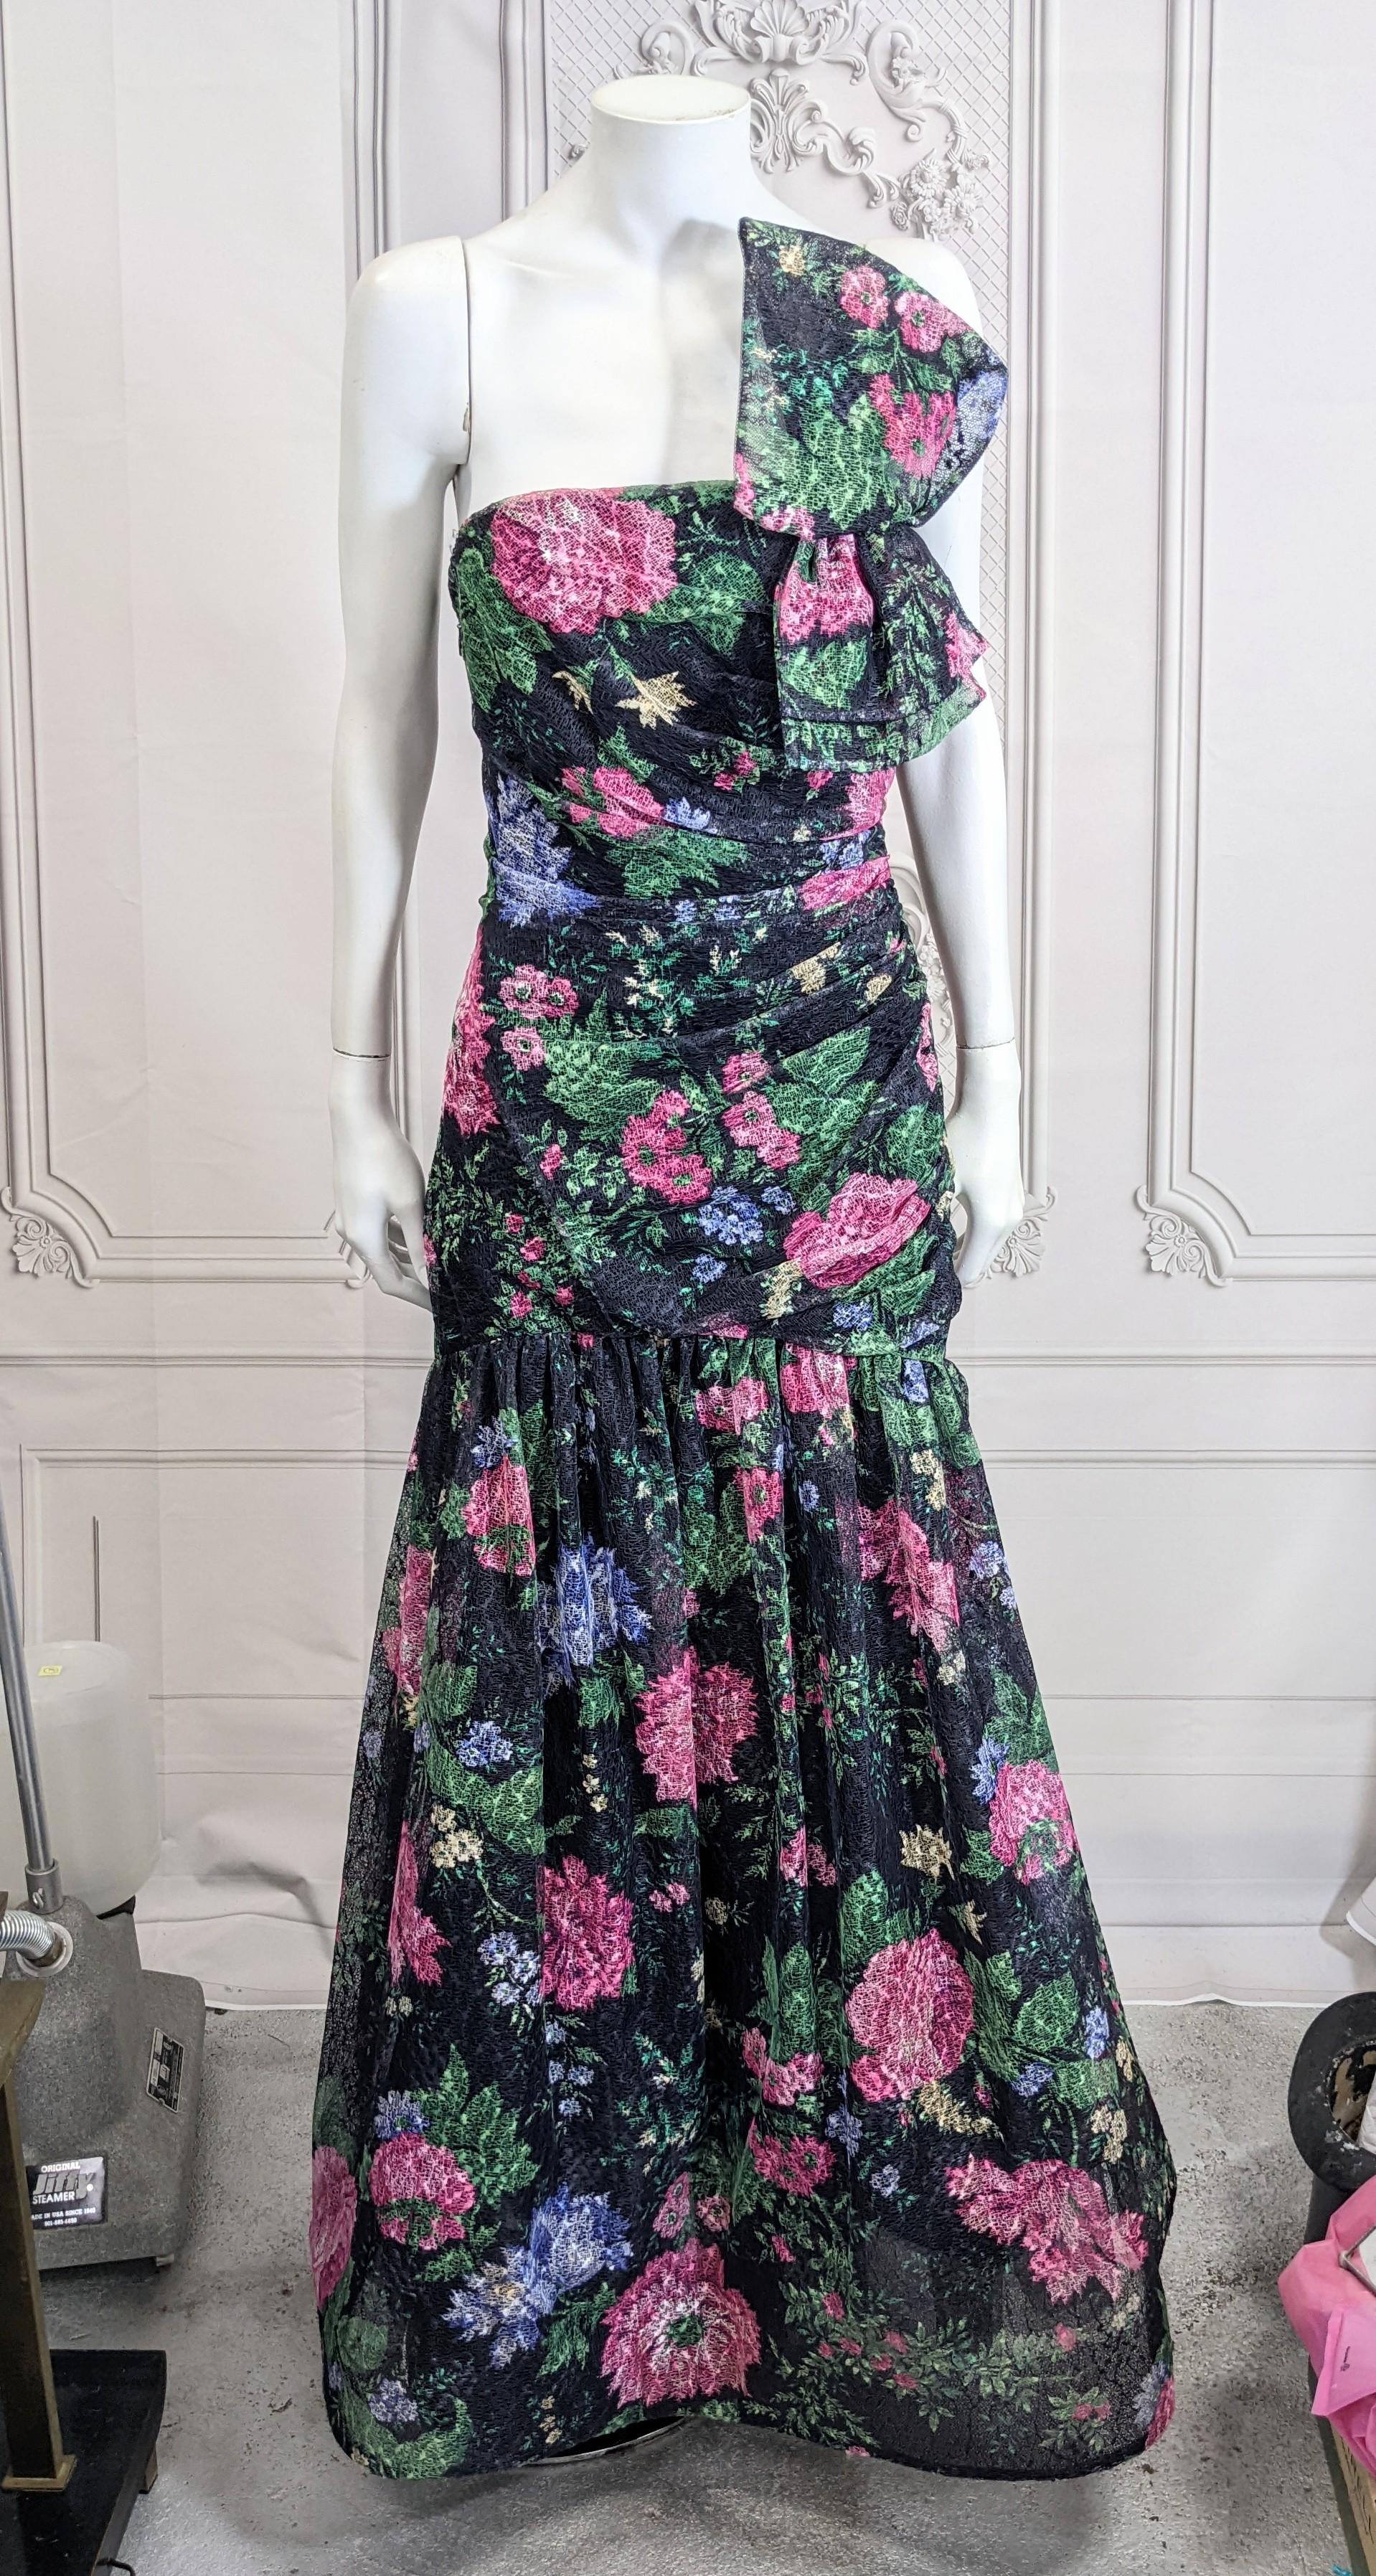 Arnold Scassi Ruched Strapless Floral Lace Net Gown with focal bow and large skirt with petticoats from the 1980's.  A stiffened floral printed lacey net is used in the long shaped gathered bodice which opens to a full skirt with petticoats